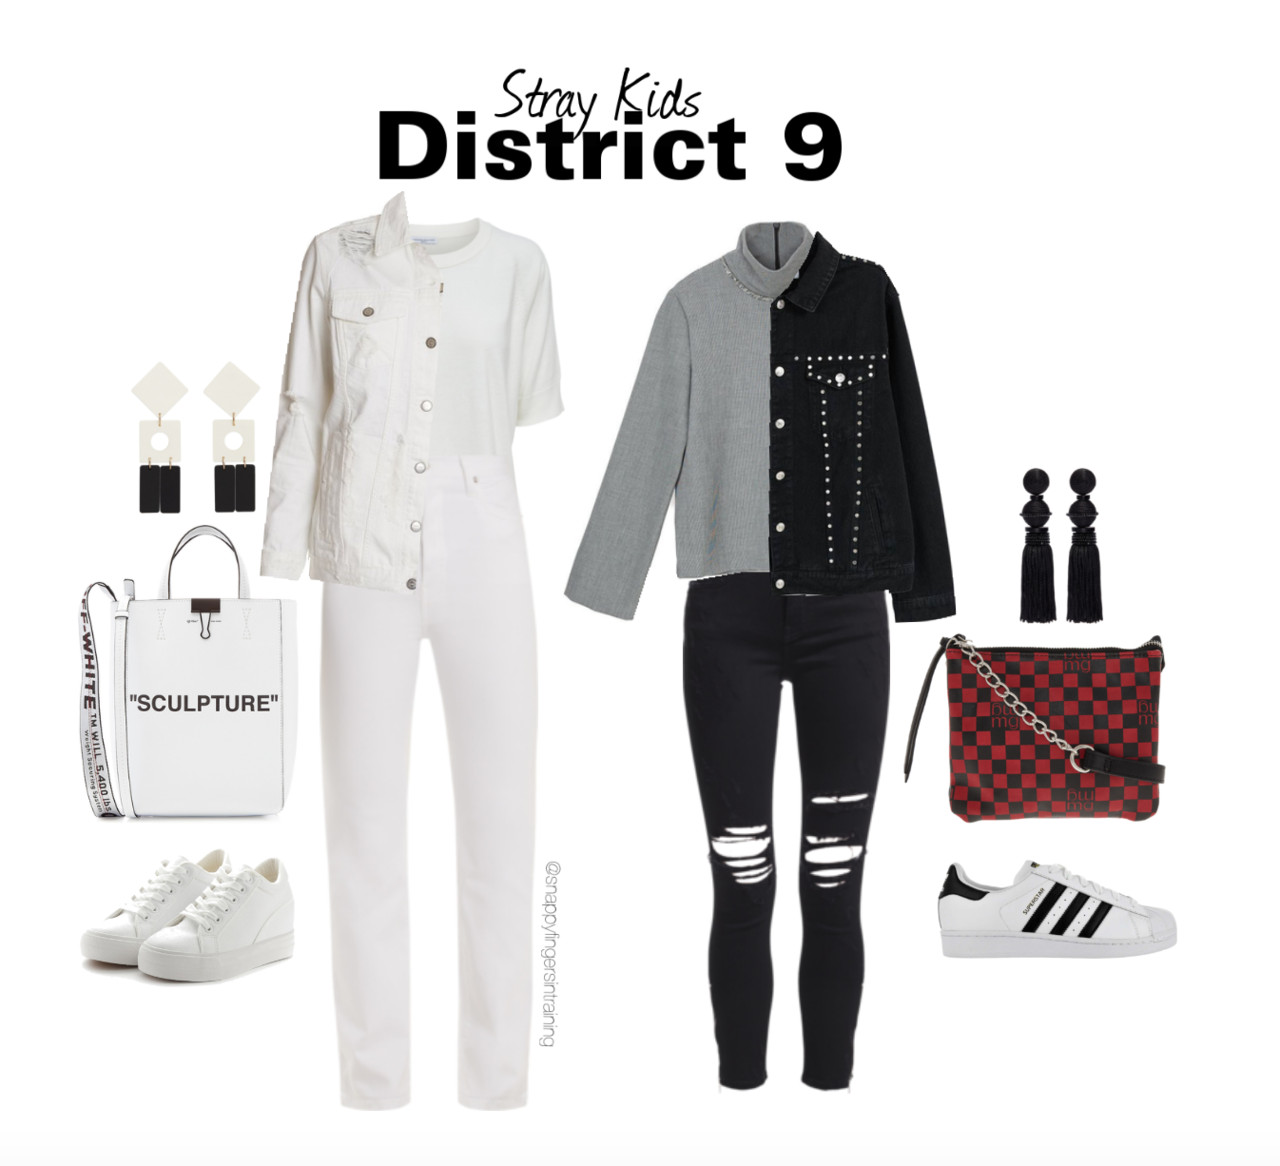 Stray Kids Fashion
 Kpop Outfits — Stray Kids ‘District 9′ Inspired Outfit